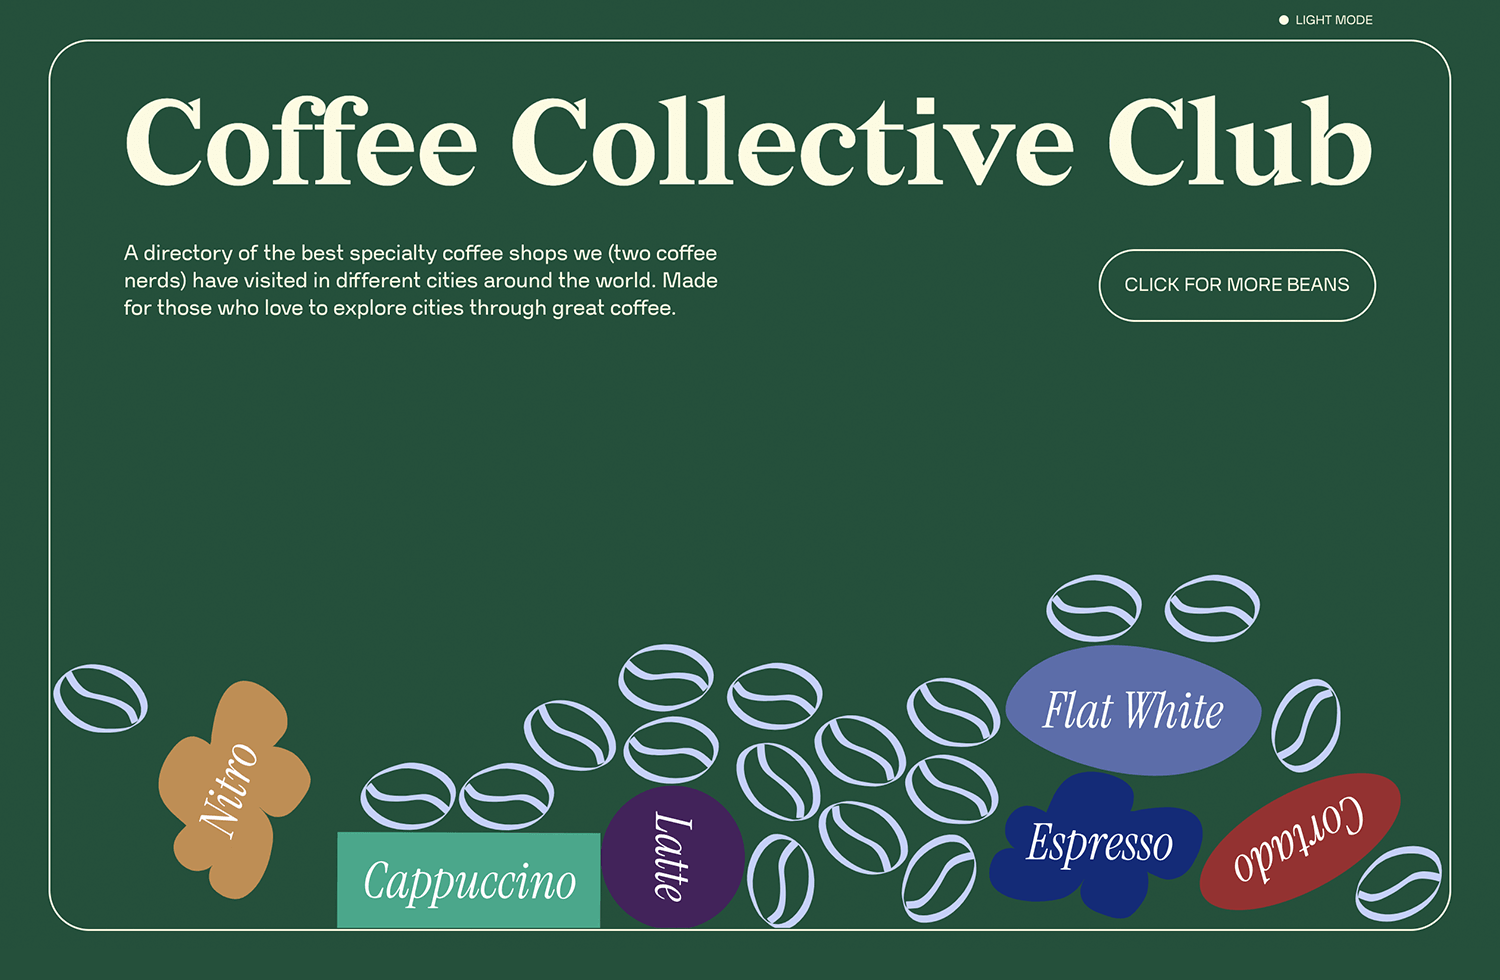 Coffee Collective Club one-page website with coffee-themed design